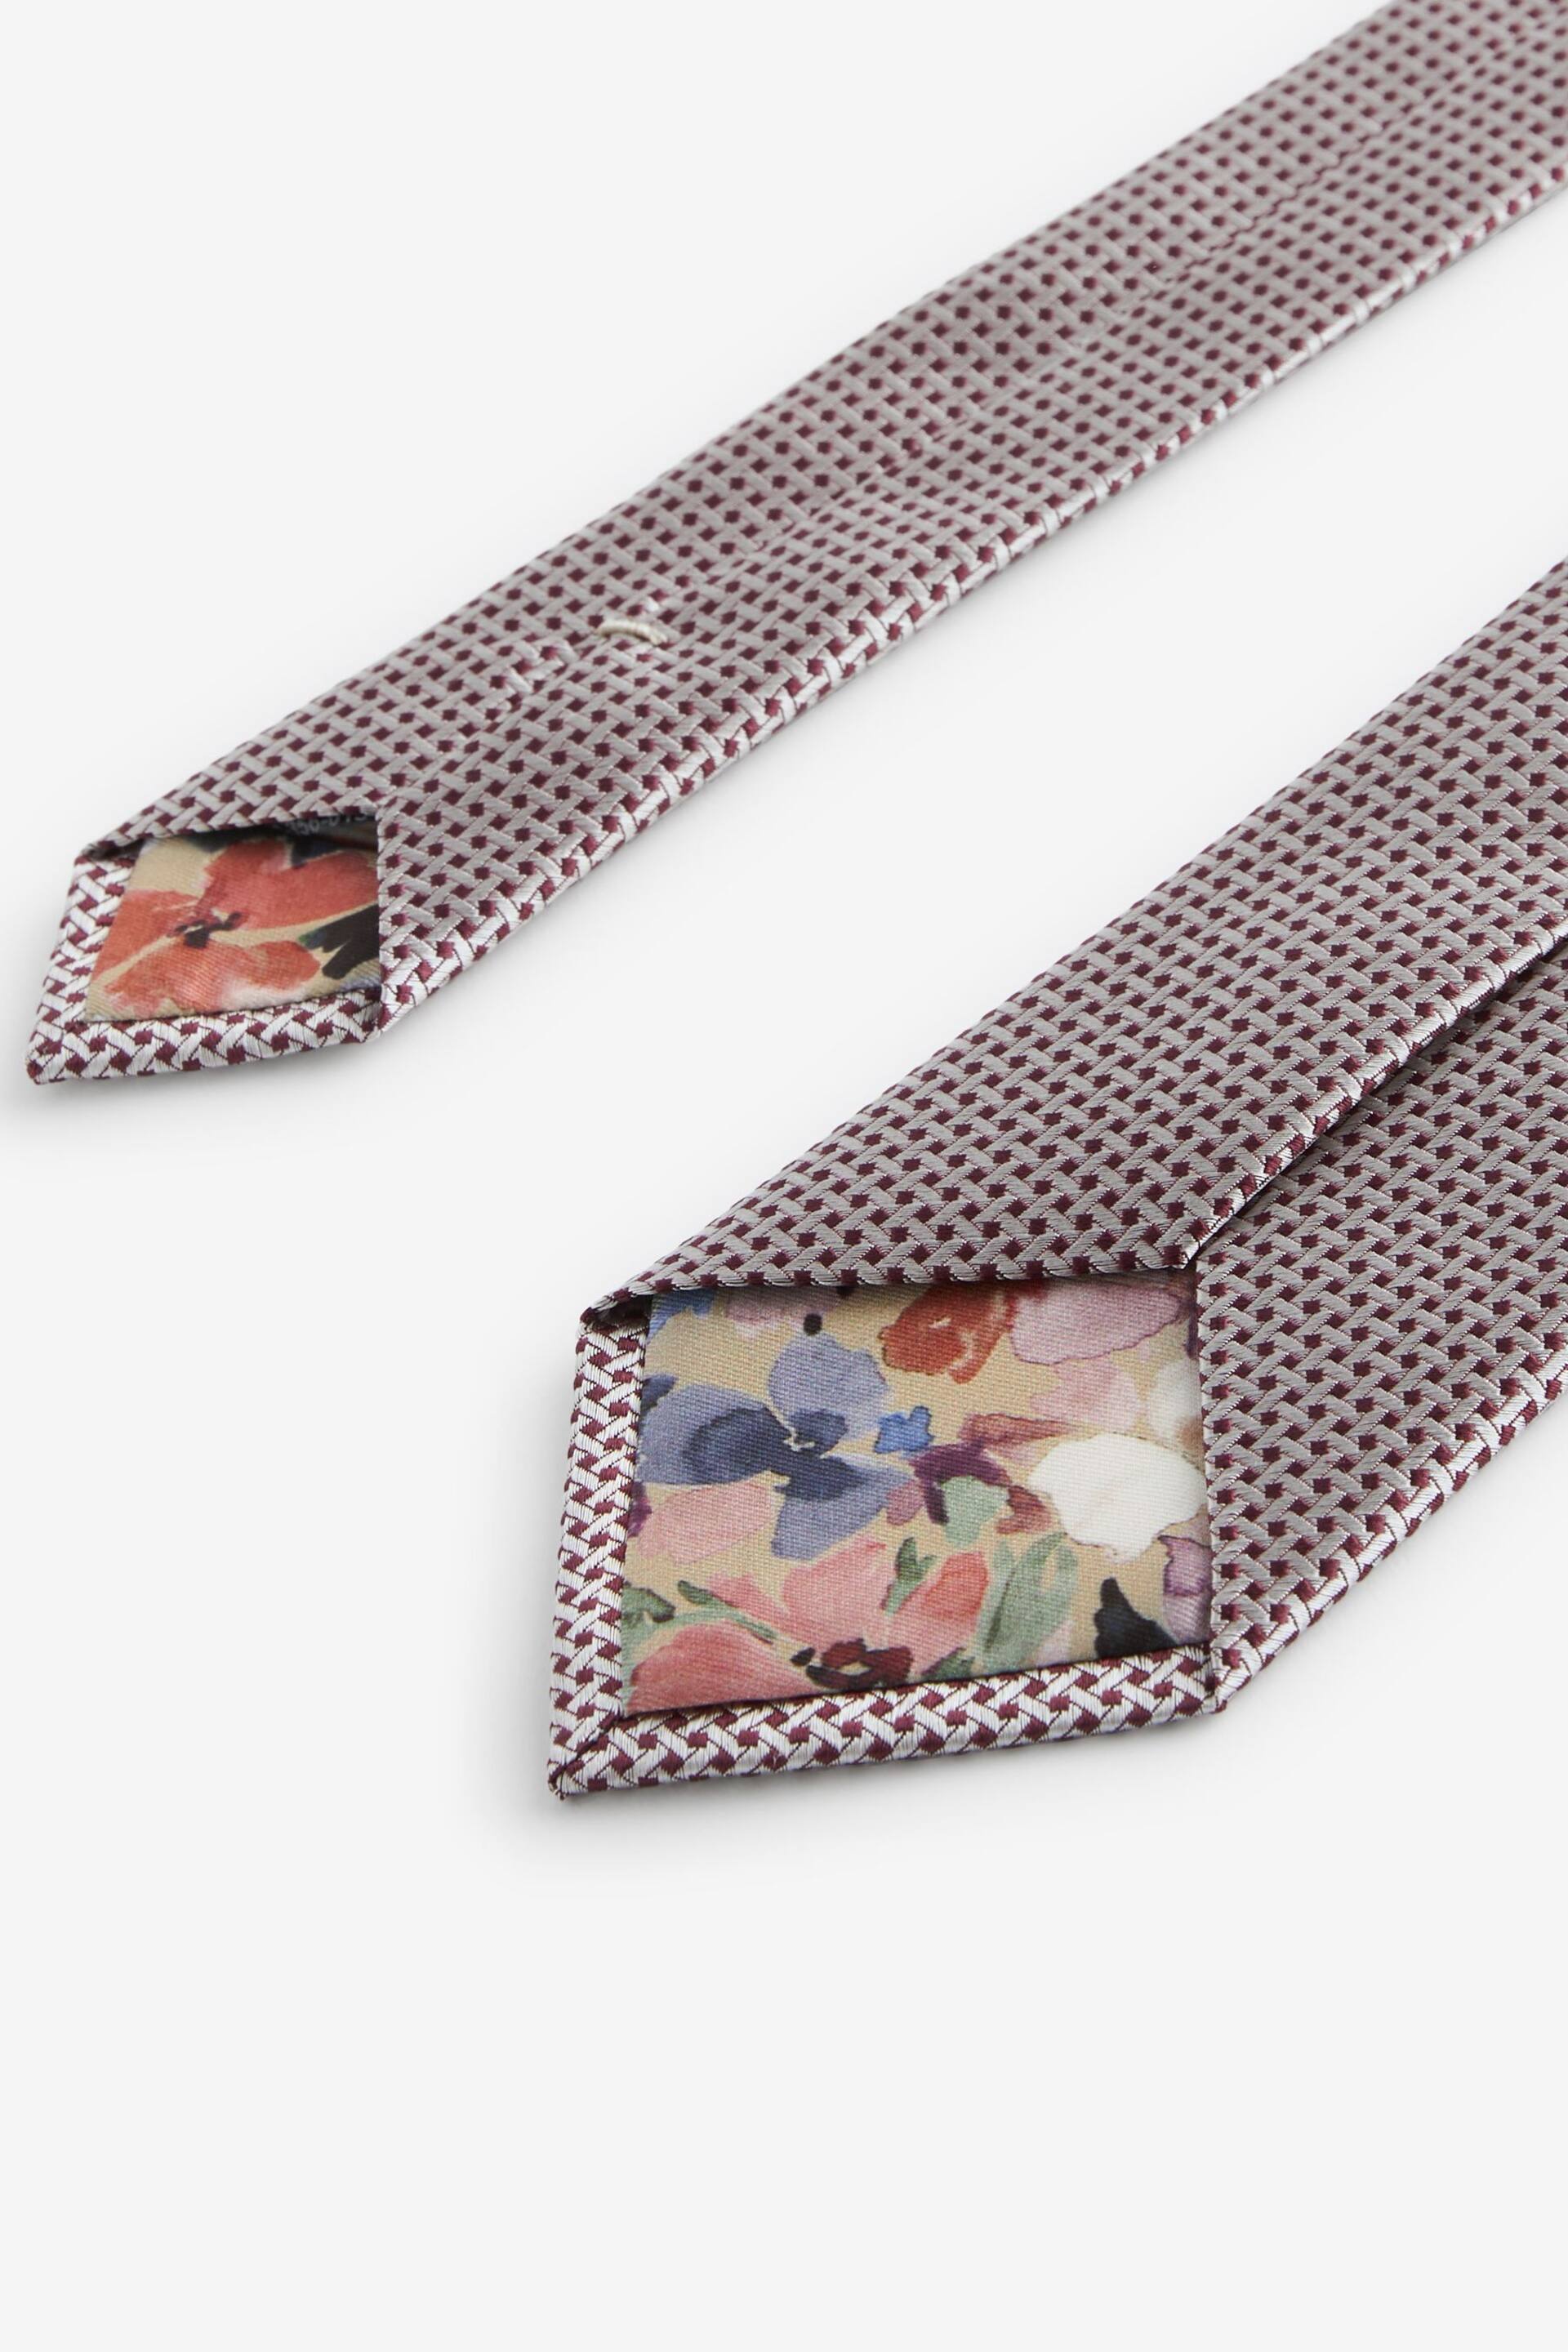 Damson Pink/Neutral Brown Textured Signature Made In Italy Tie - Image 3 of 3